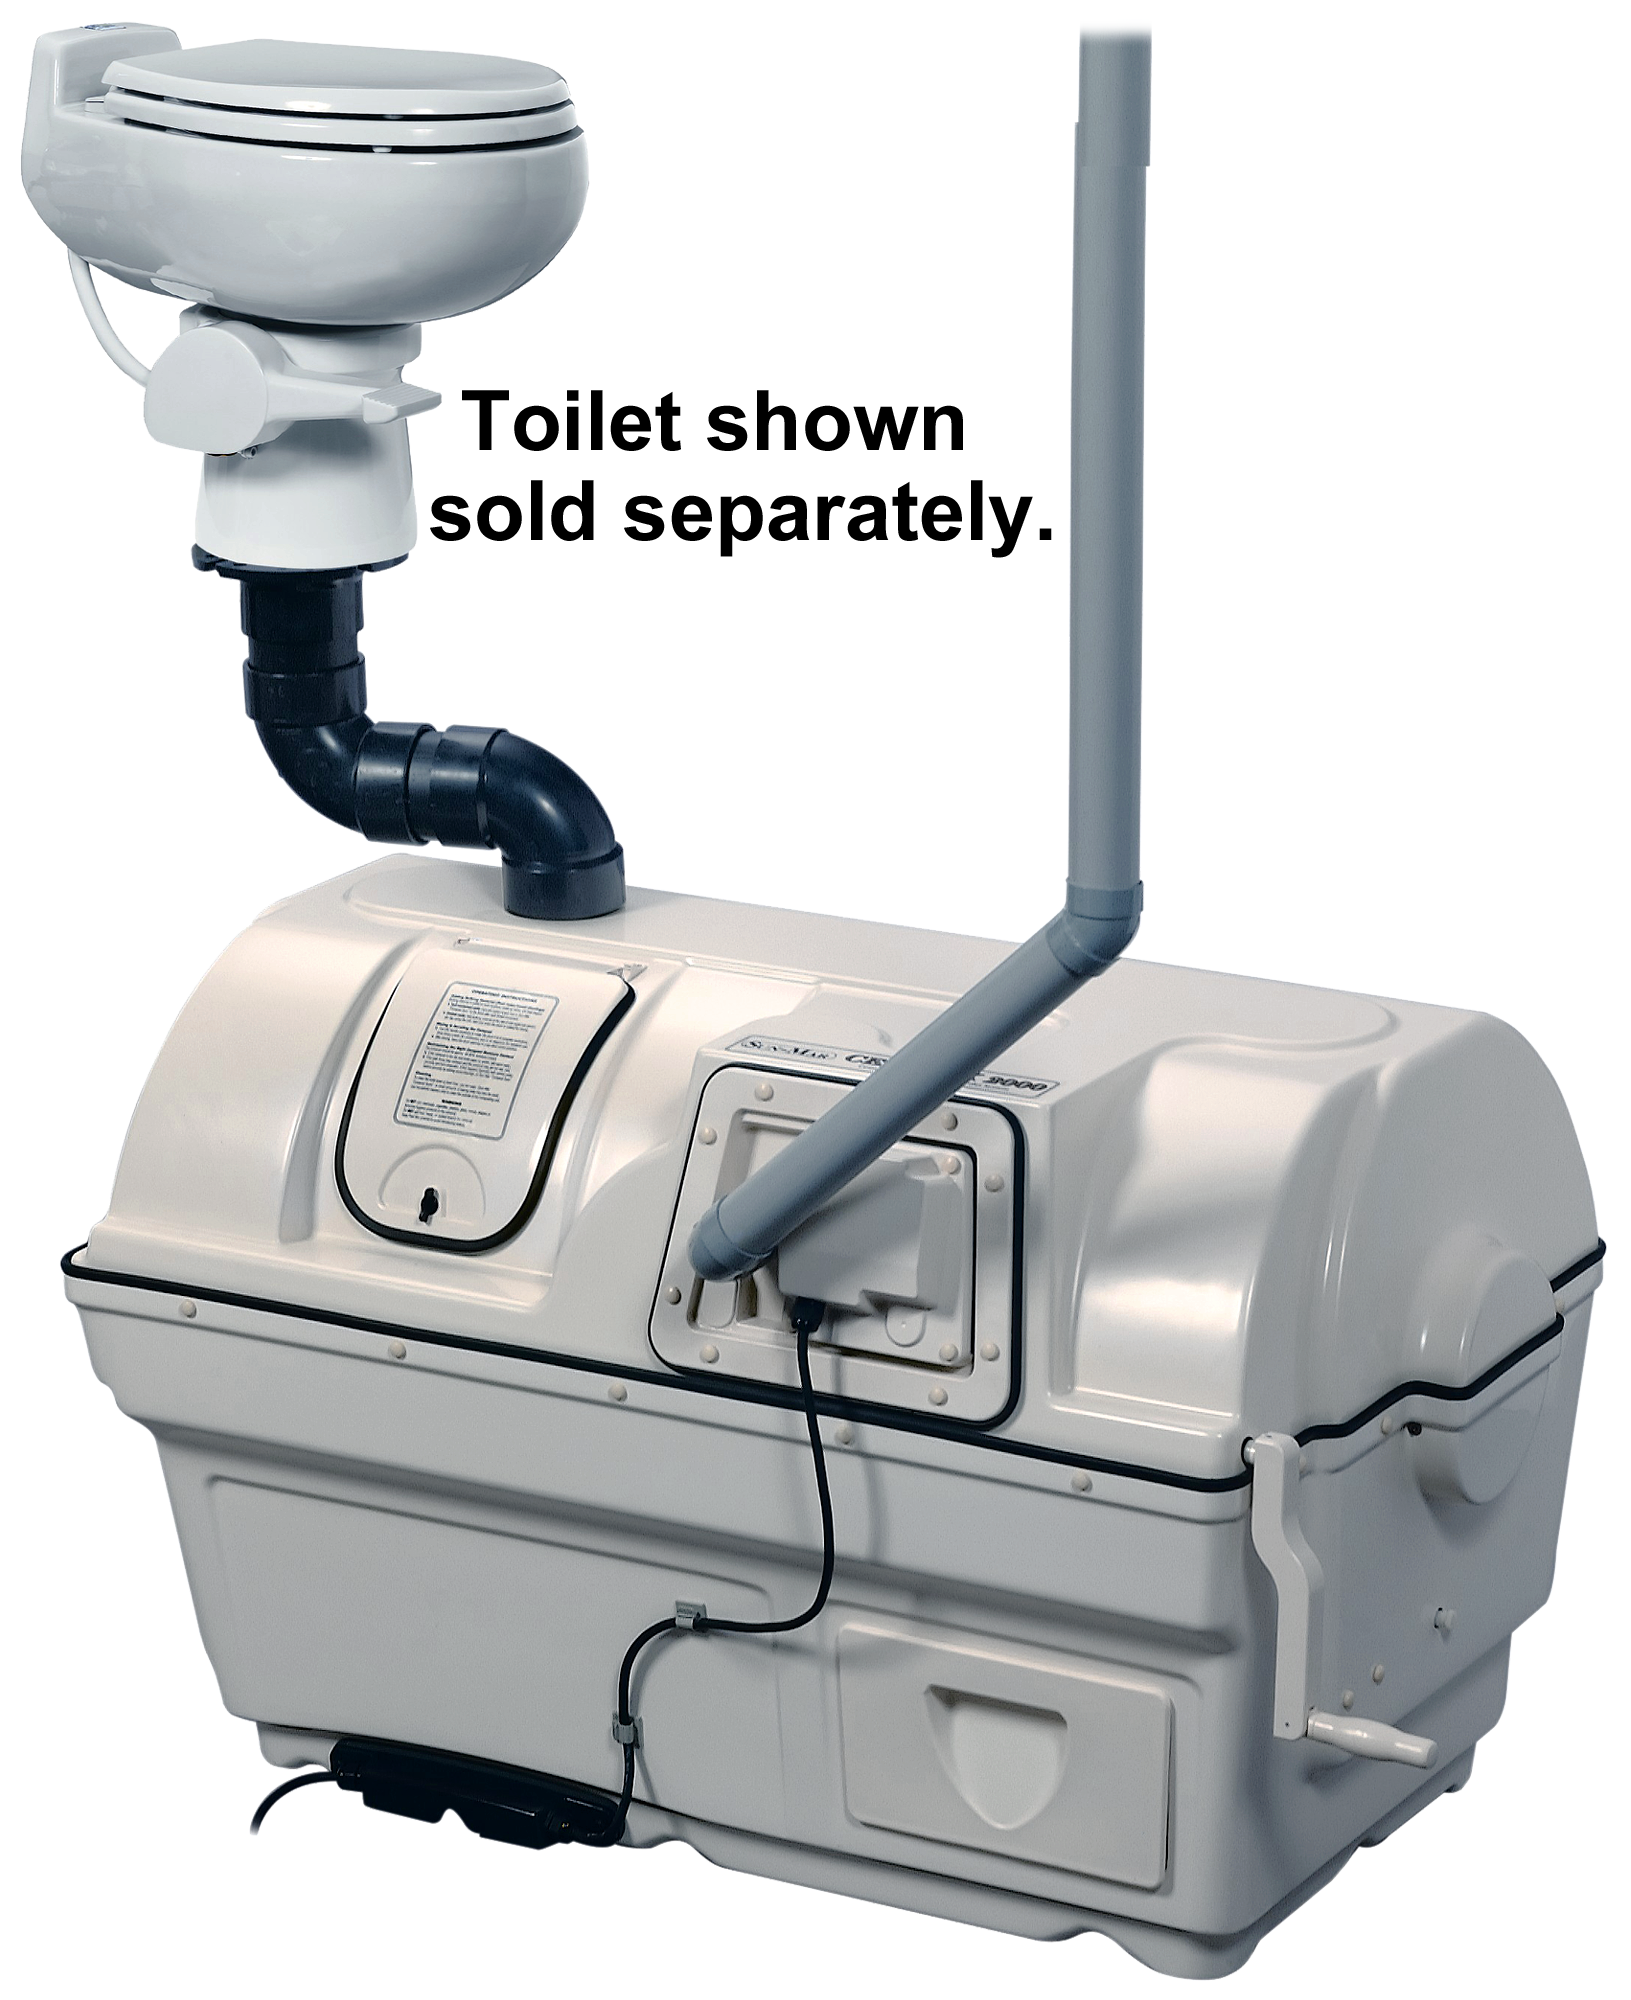 Sun-Mar Centrex 2000 Electric Composting System for Sealand Low Flush Toilets